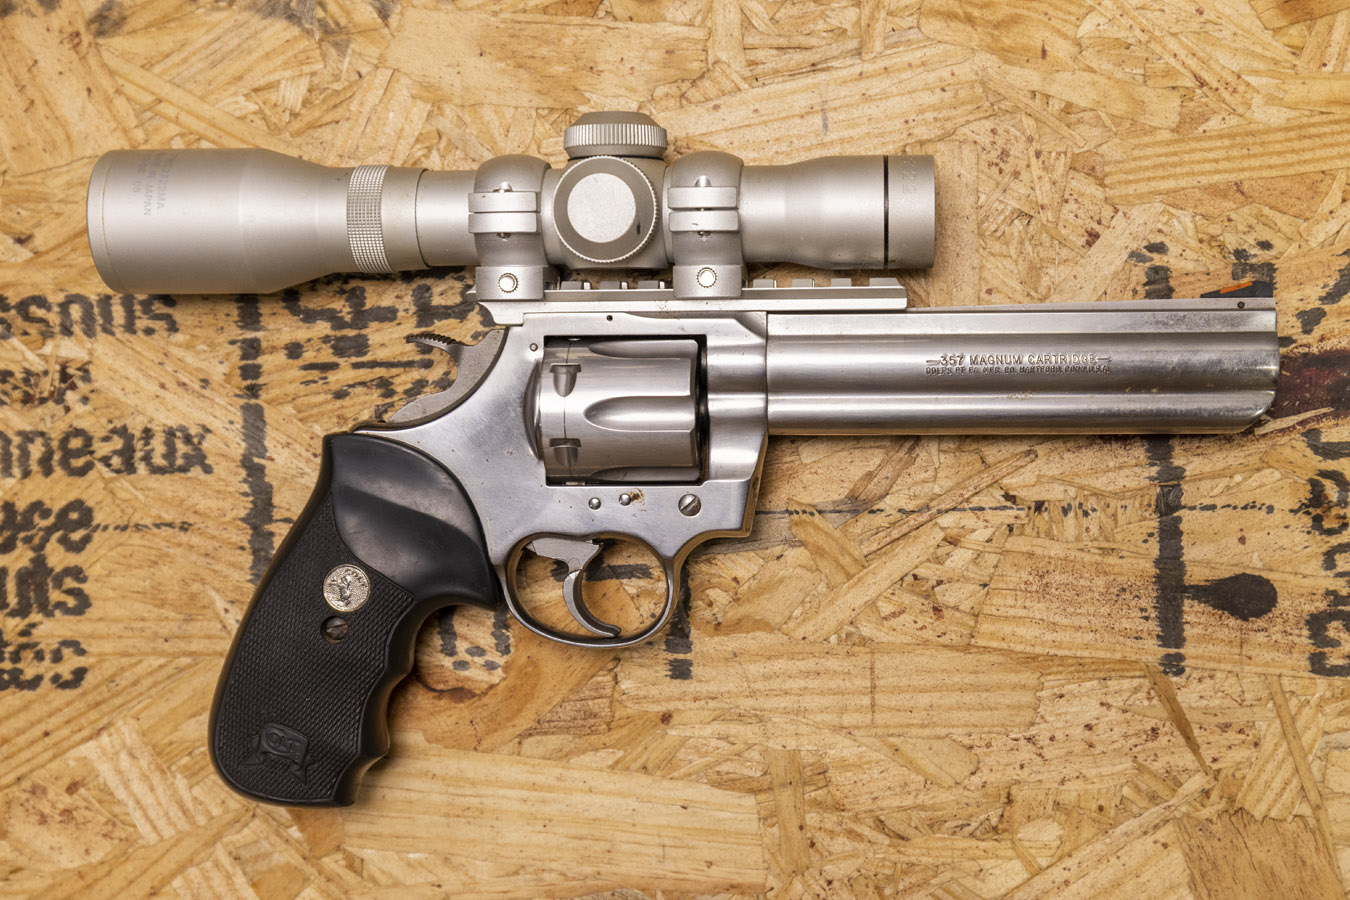 KING COBRA .357 MAGNUM POLICE TRADE-IN REVOLVER WITH OPTIC